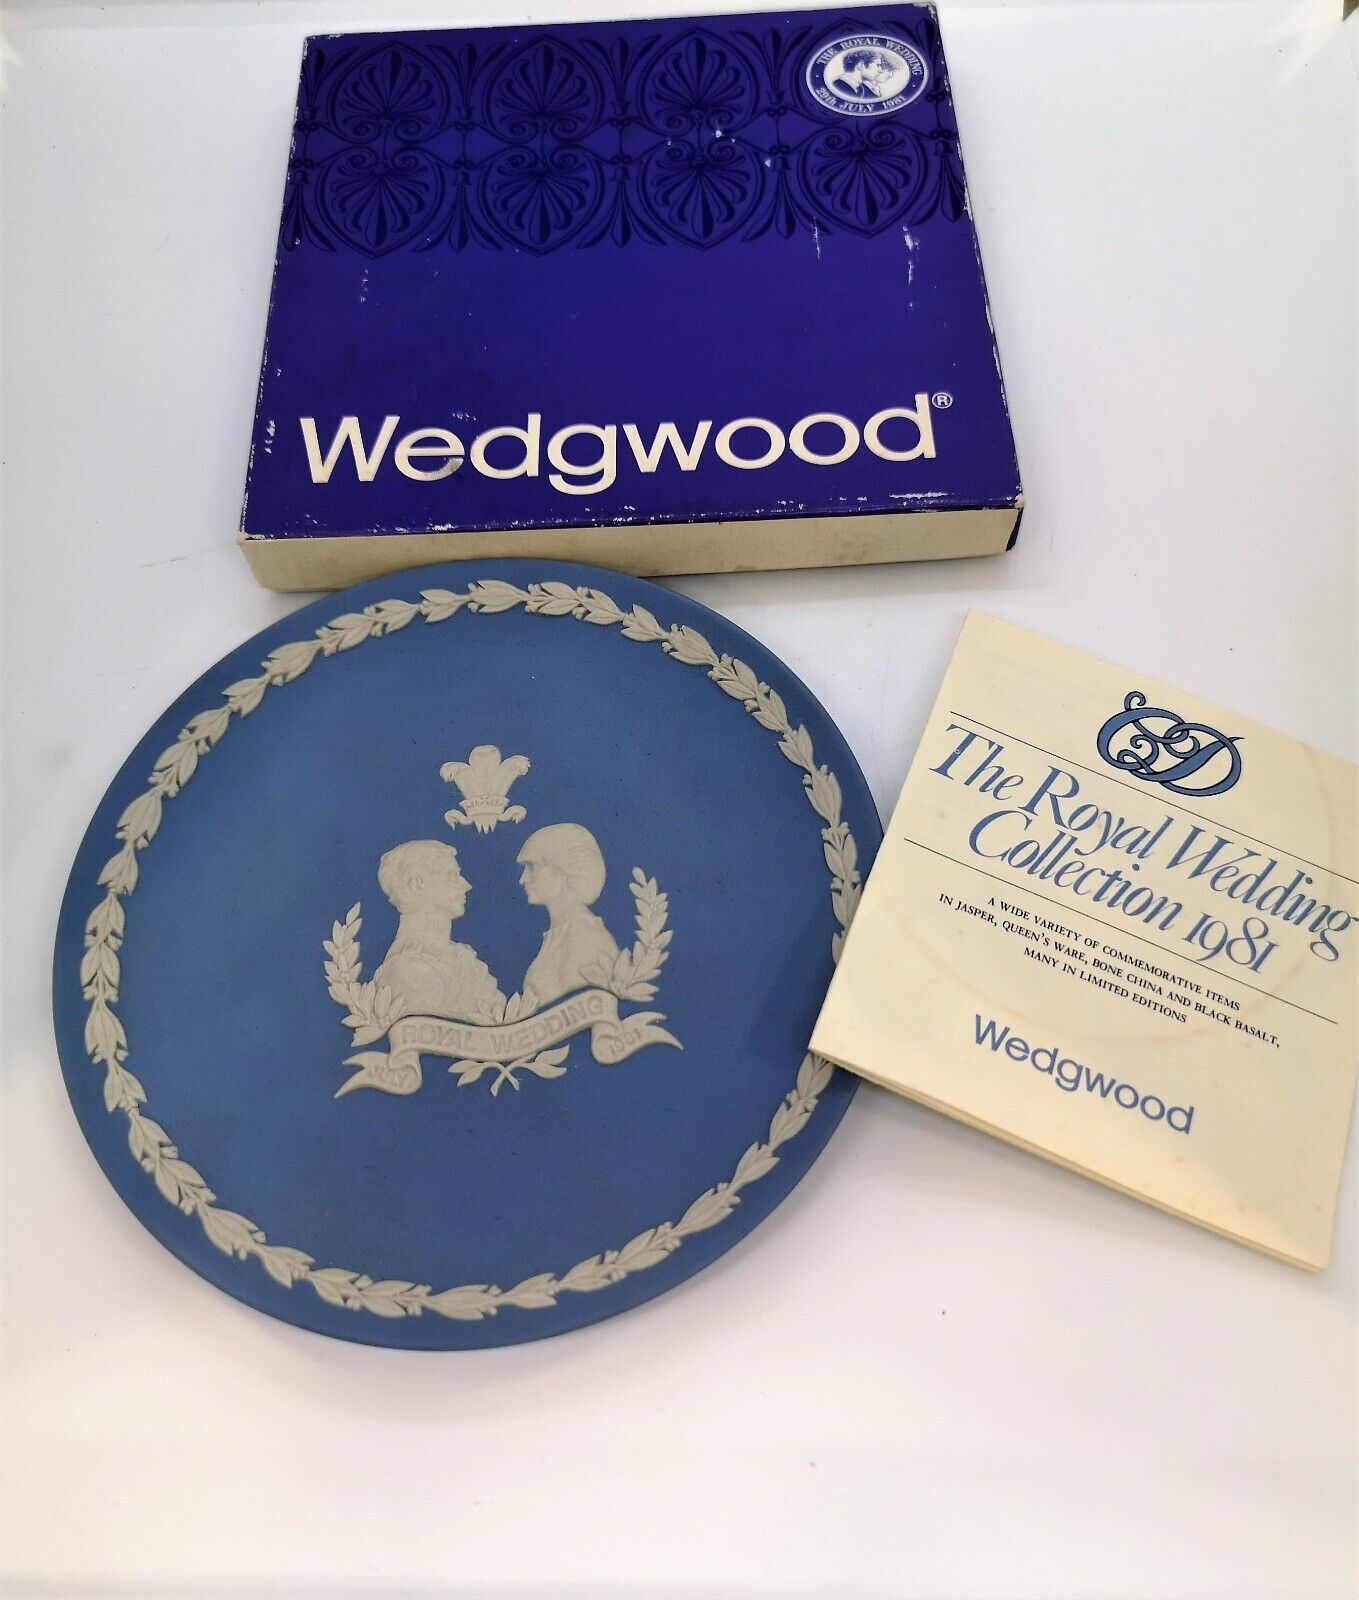 Wedgwood Round Porcelain Plate The Royal Wedding Collection Mark Home Decoration